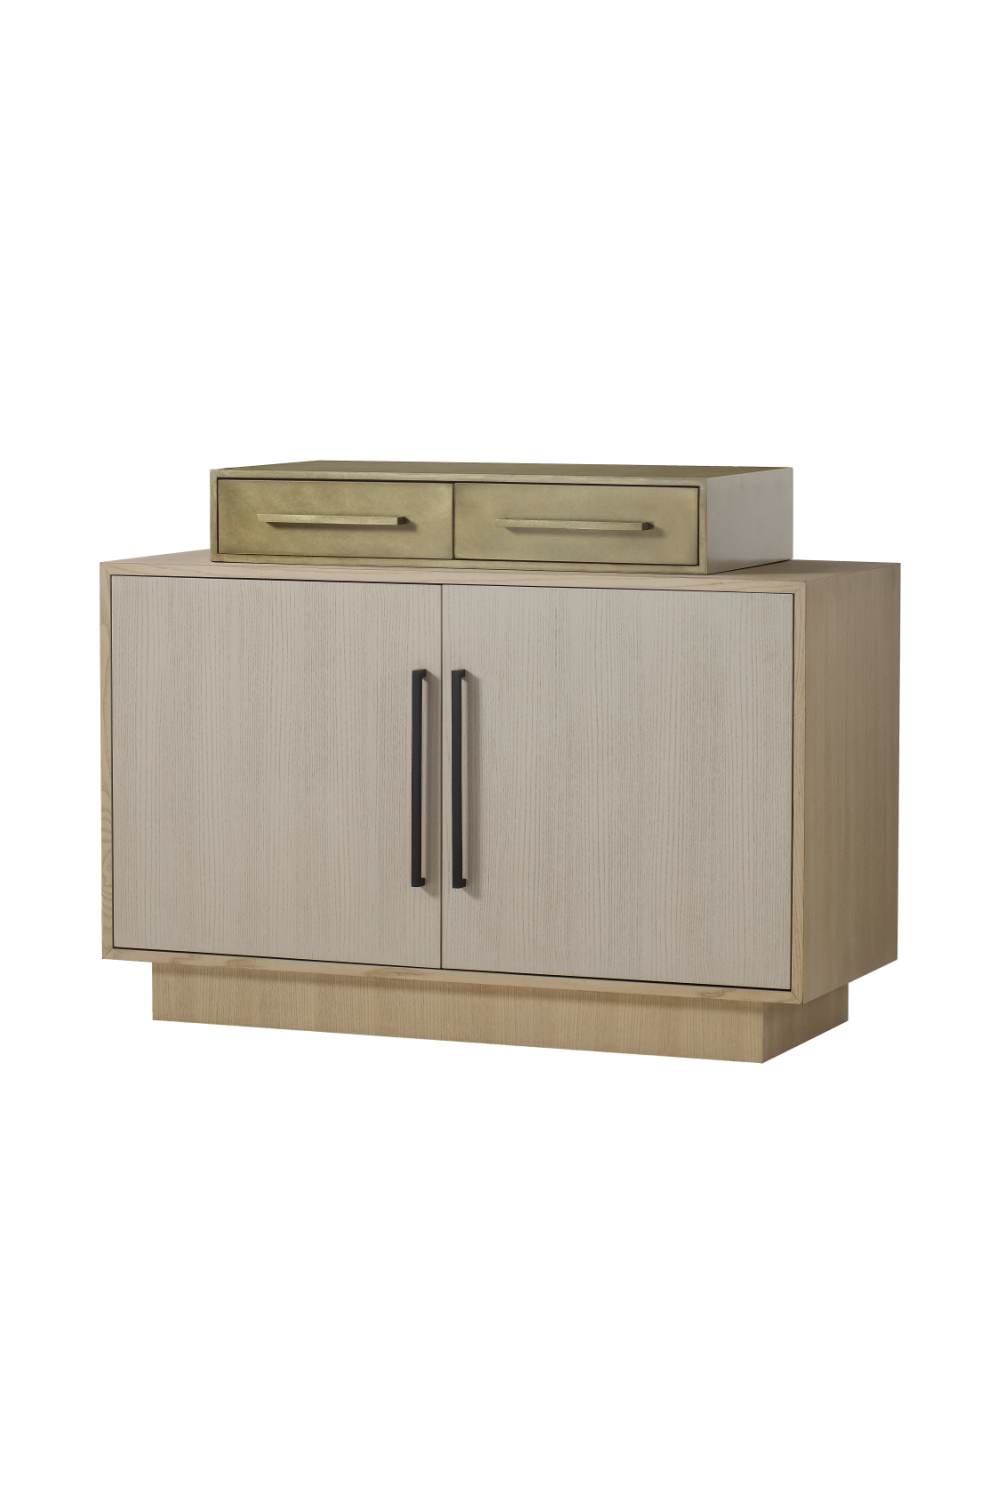 Two-Toned Ash Sideboard | Andrew Martin Louis | OROA